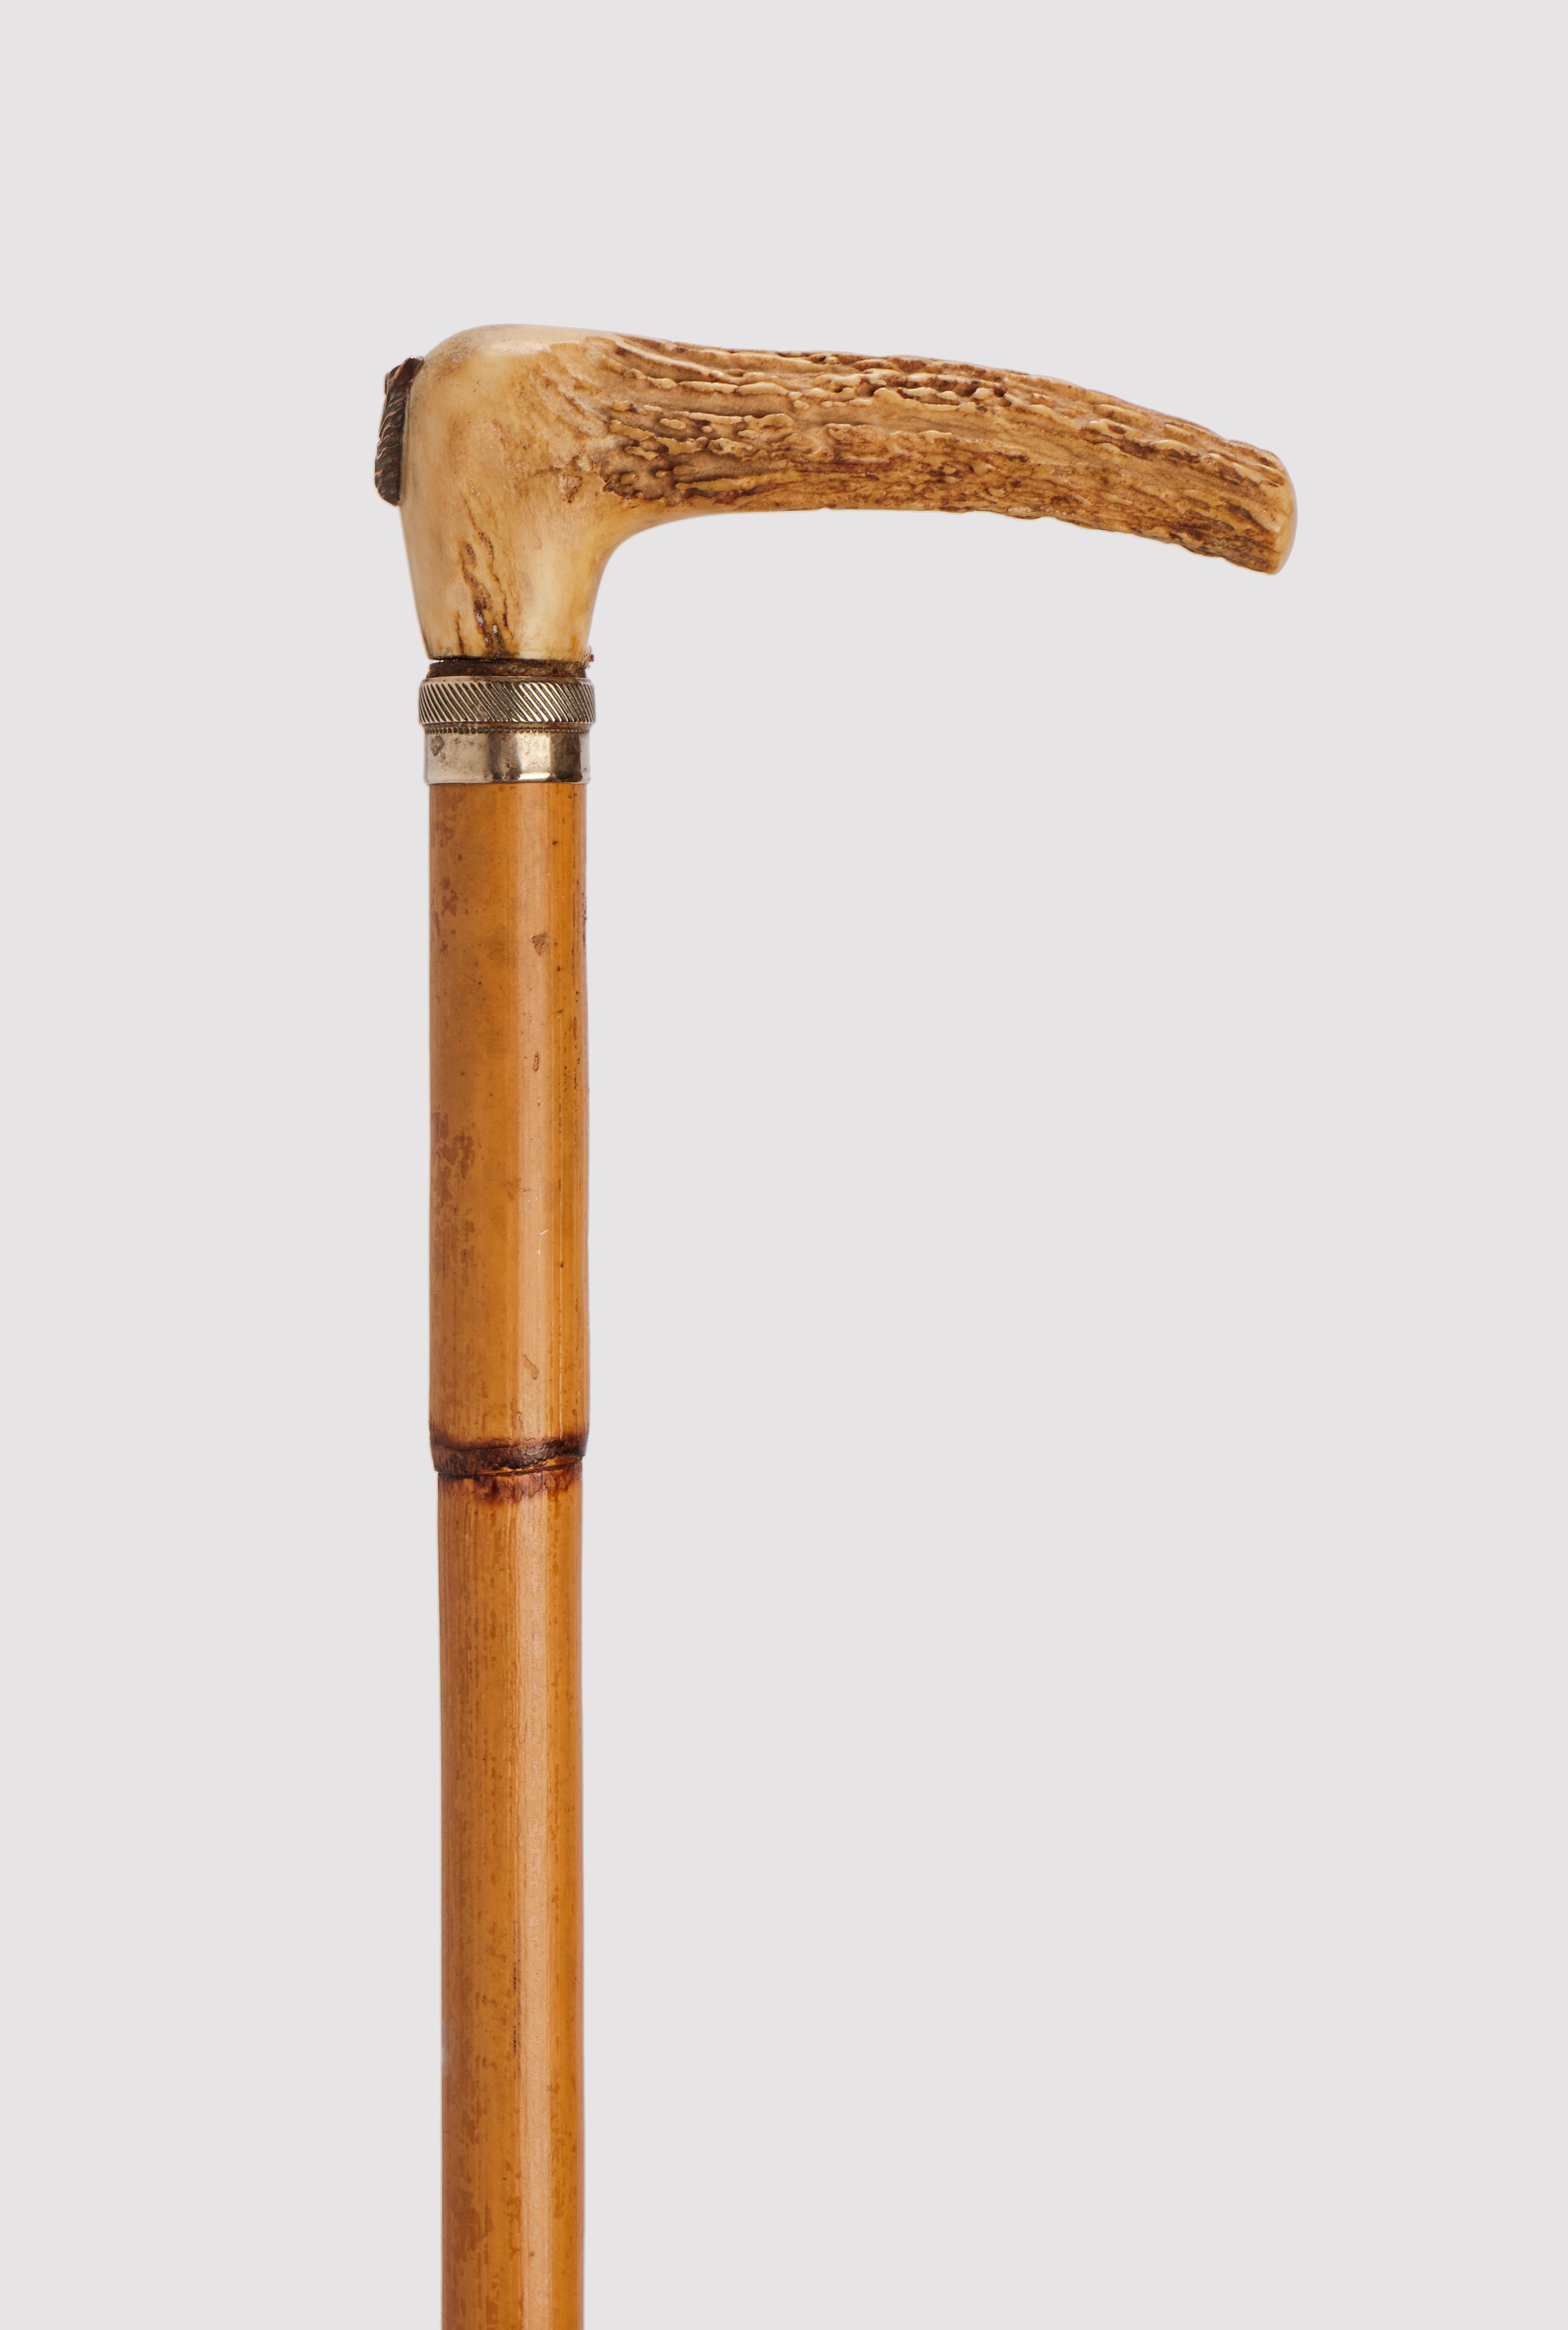 Gadget-System walking stick: stick with the function of measuring horses. Bamboo wood barrel, deer horn knob with copper horse head profile. Pulling the knob removes an instrument for measuring the height of the horse's withers. France circa 1890.